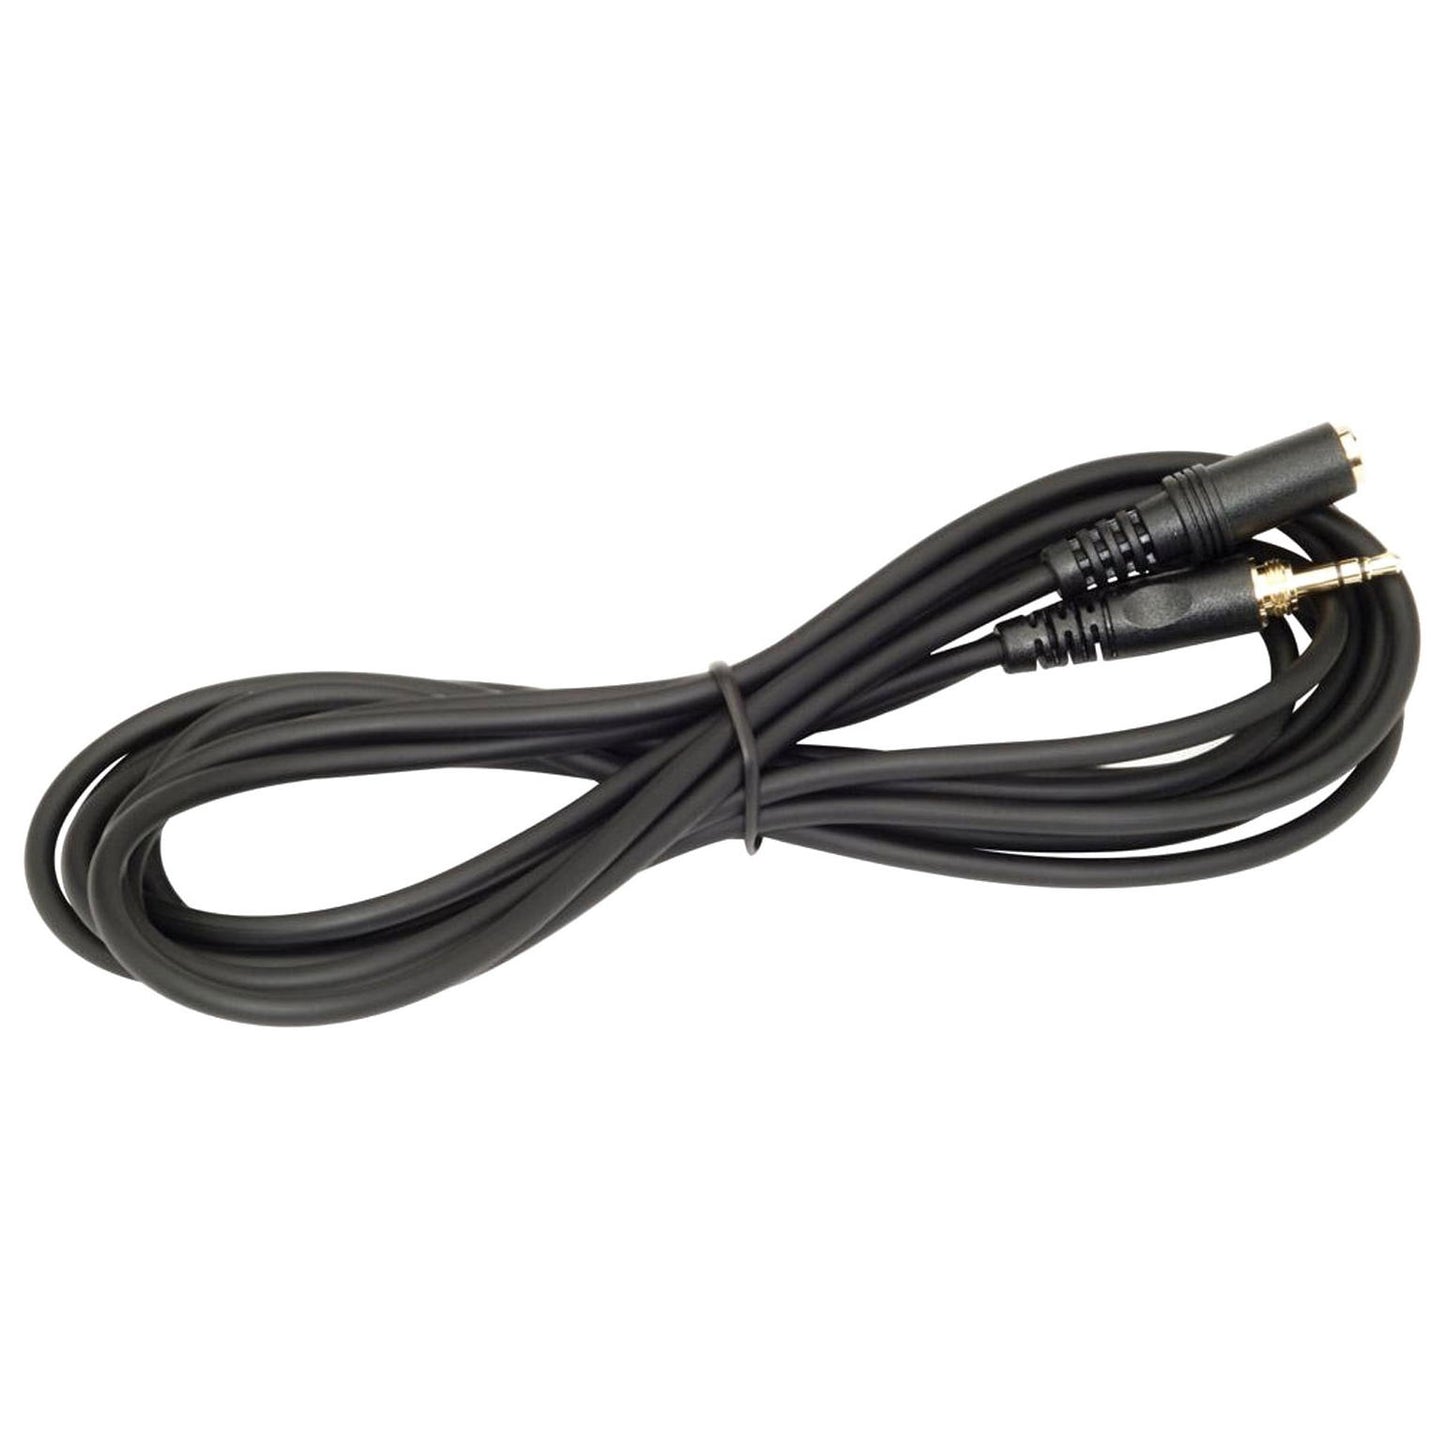 KRK Straight 9.8 Foot Headphone Extension Cable